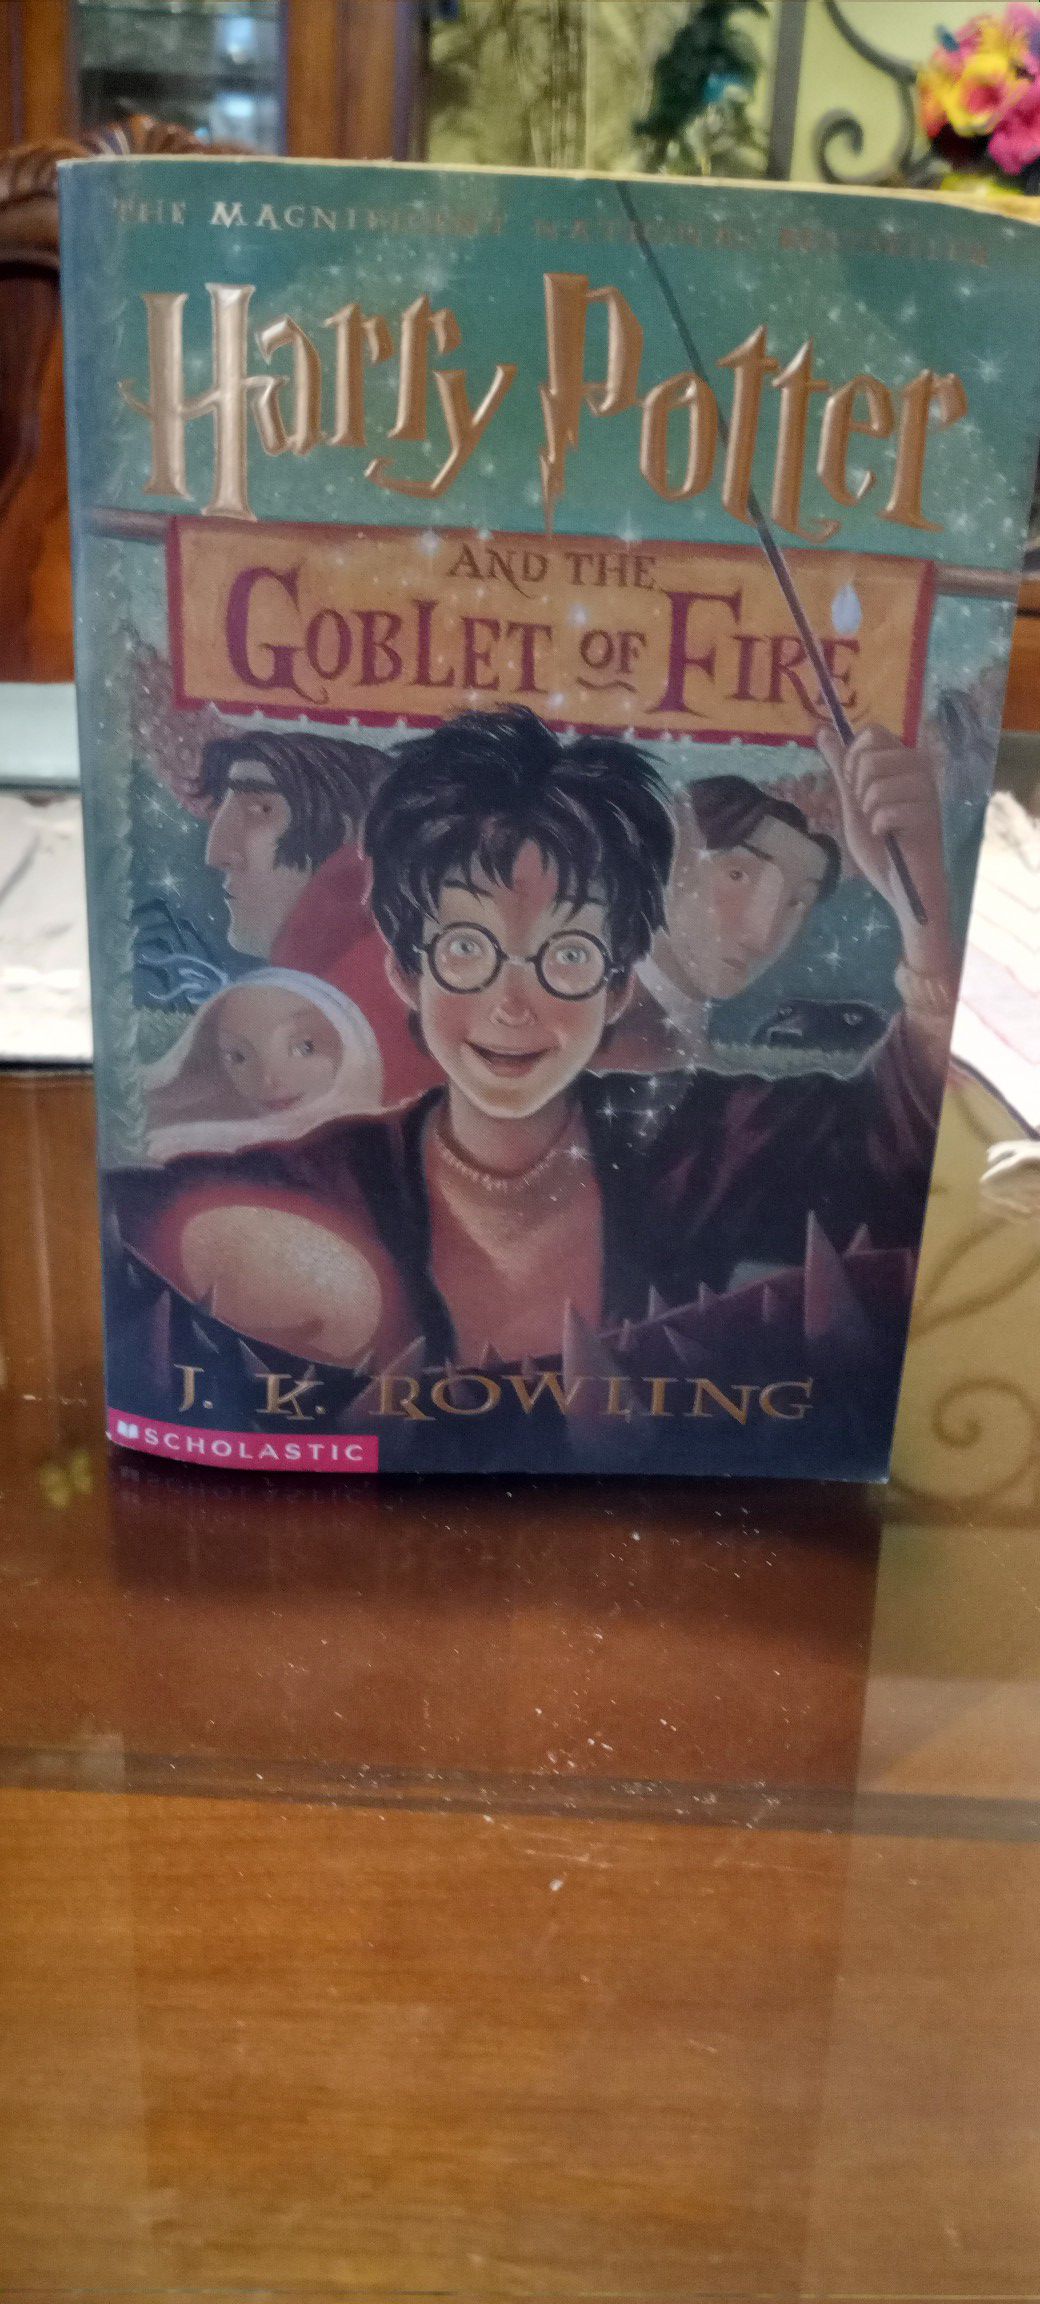 Harry Potter Book 4